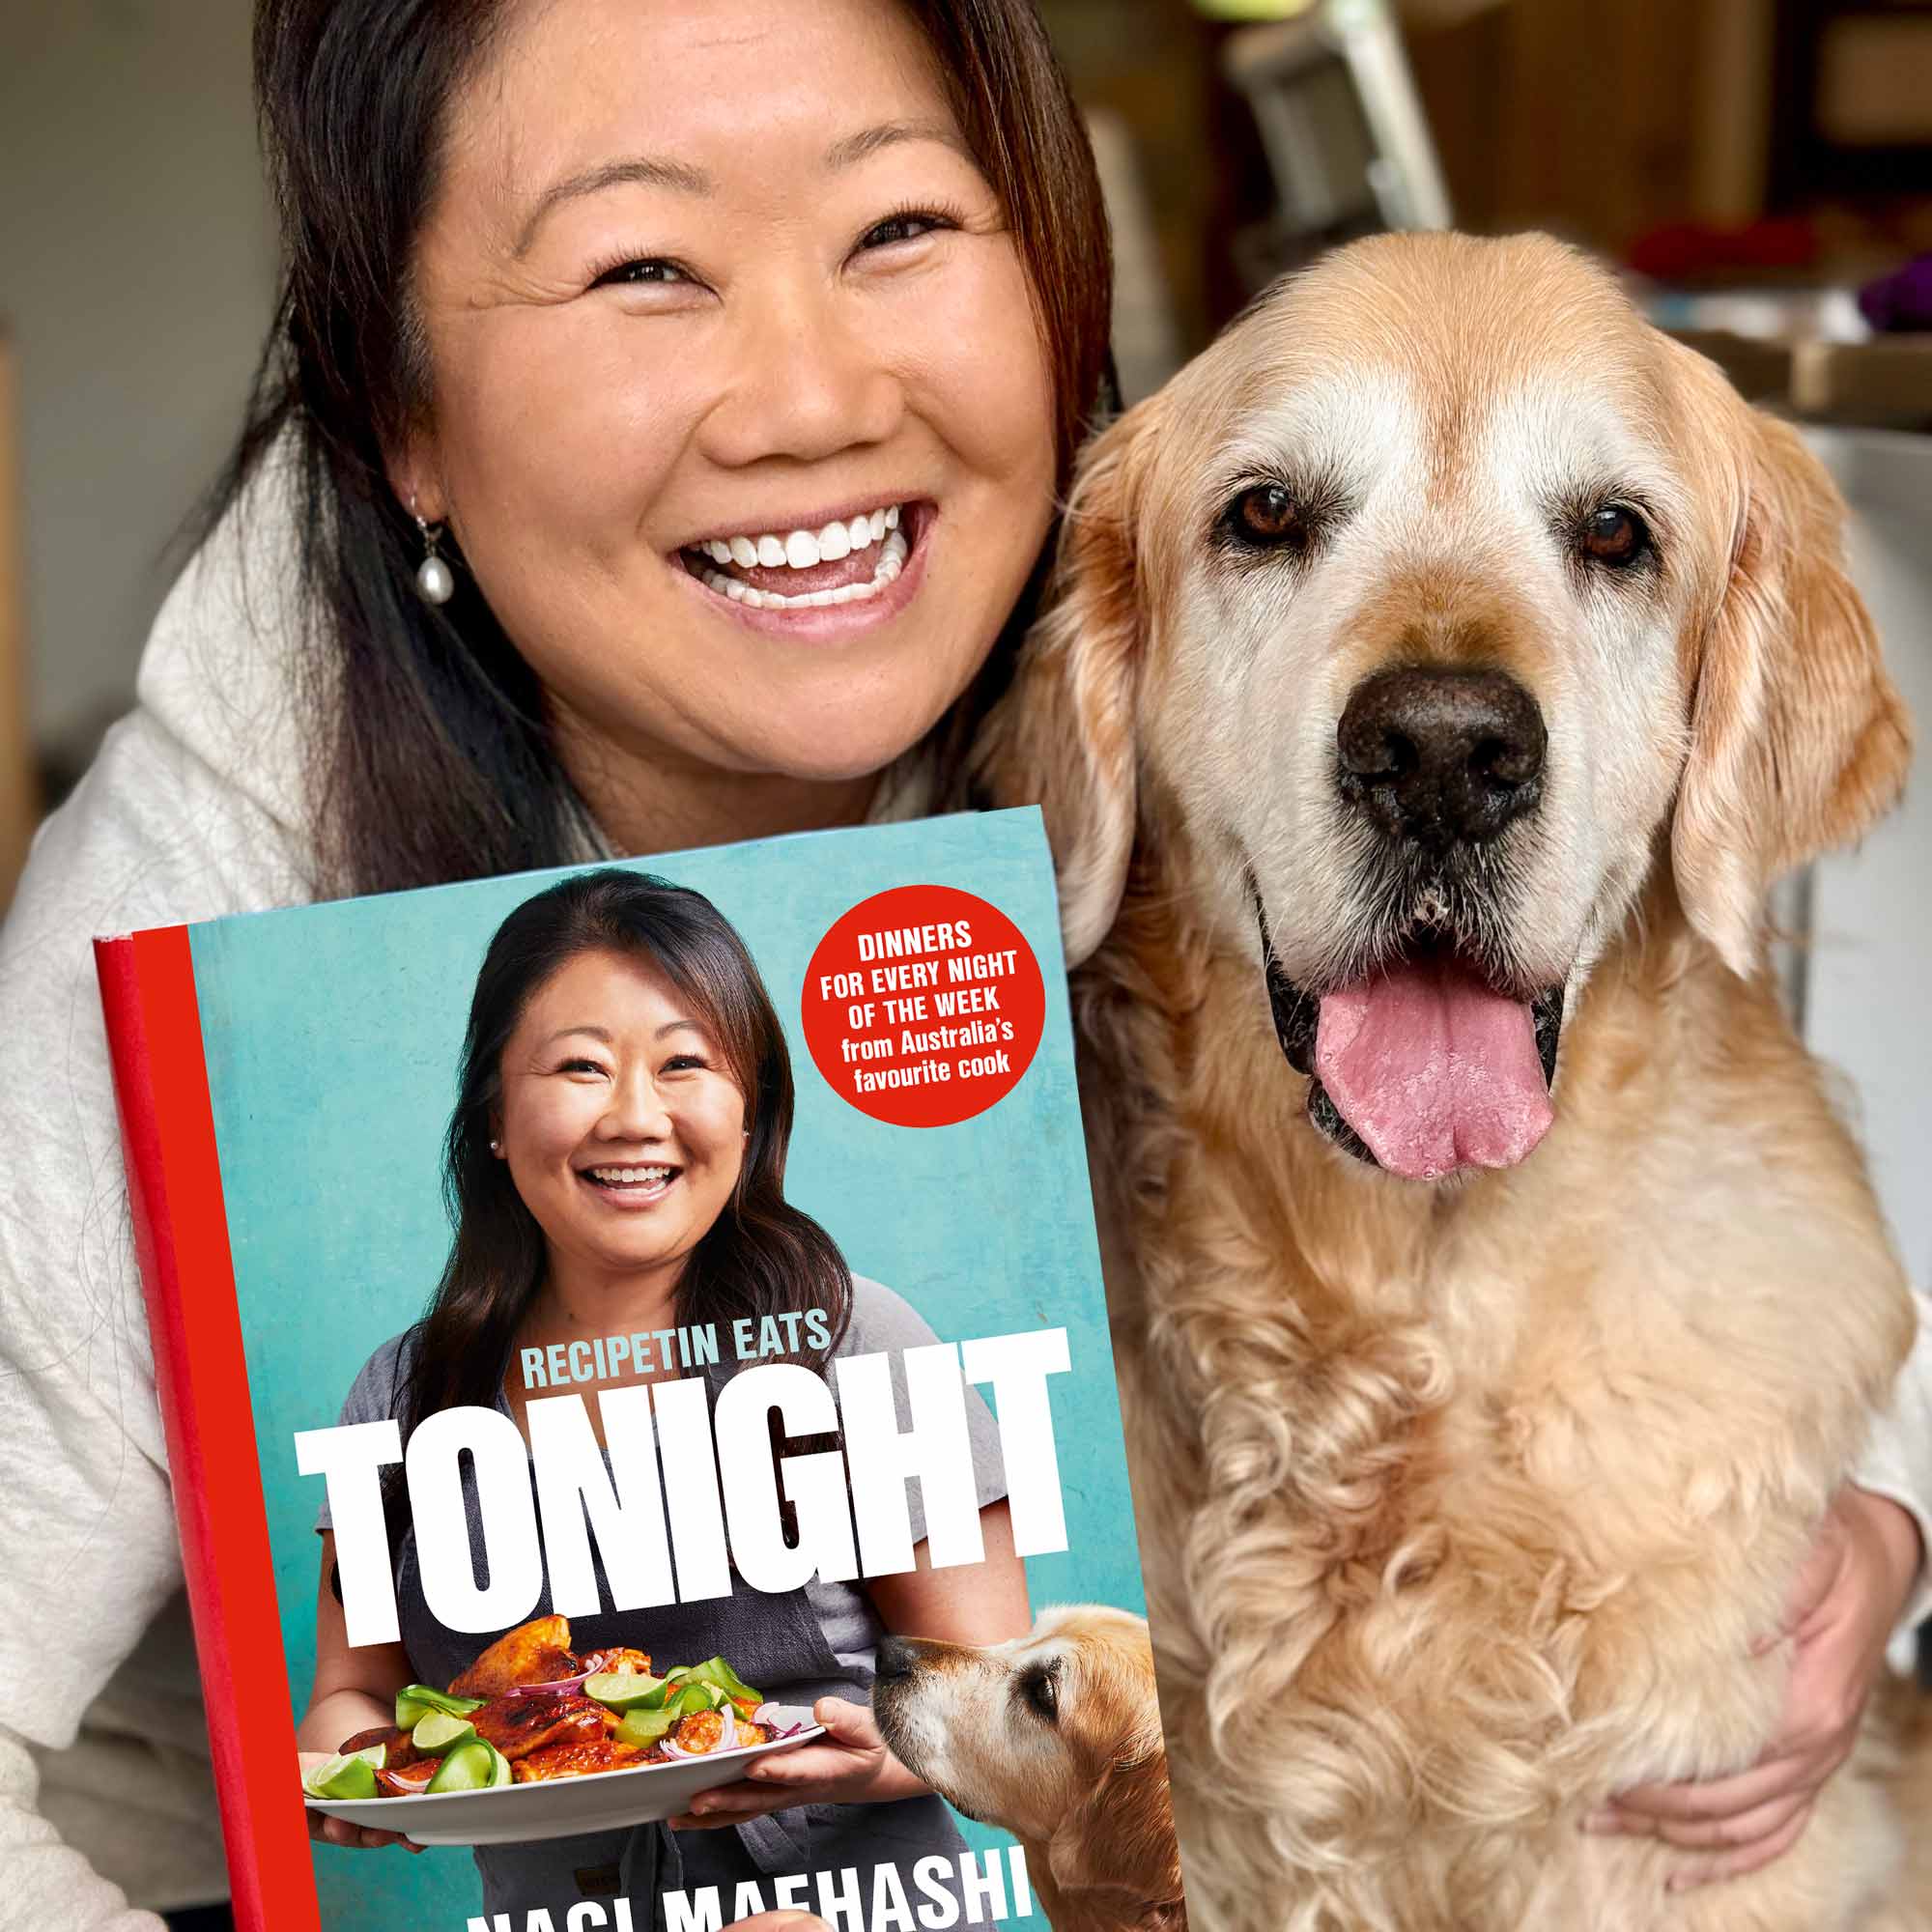 SURPRISE! I wrote another cookbook: TONIGHT